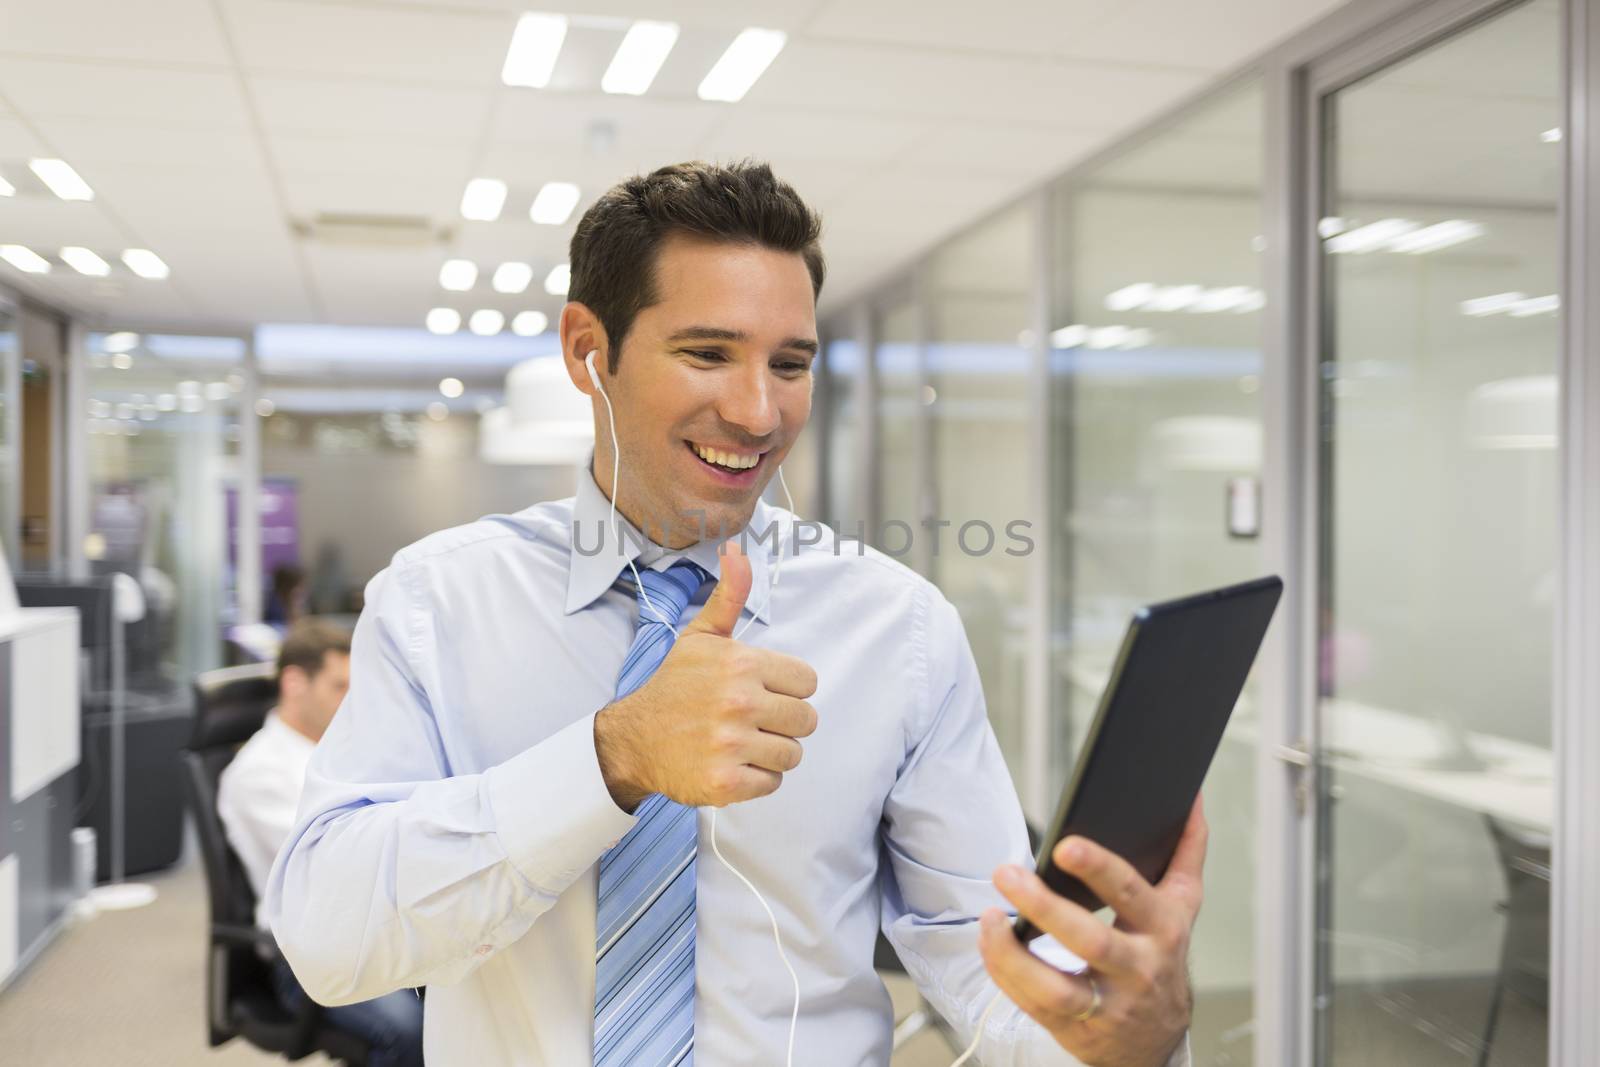 Smiling Businessman chatting on internet with Tablet Pc, office Background